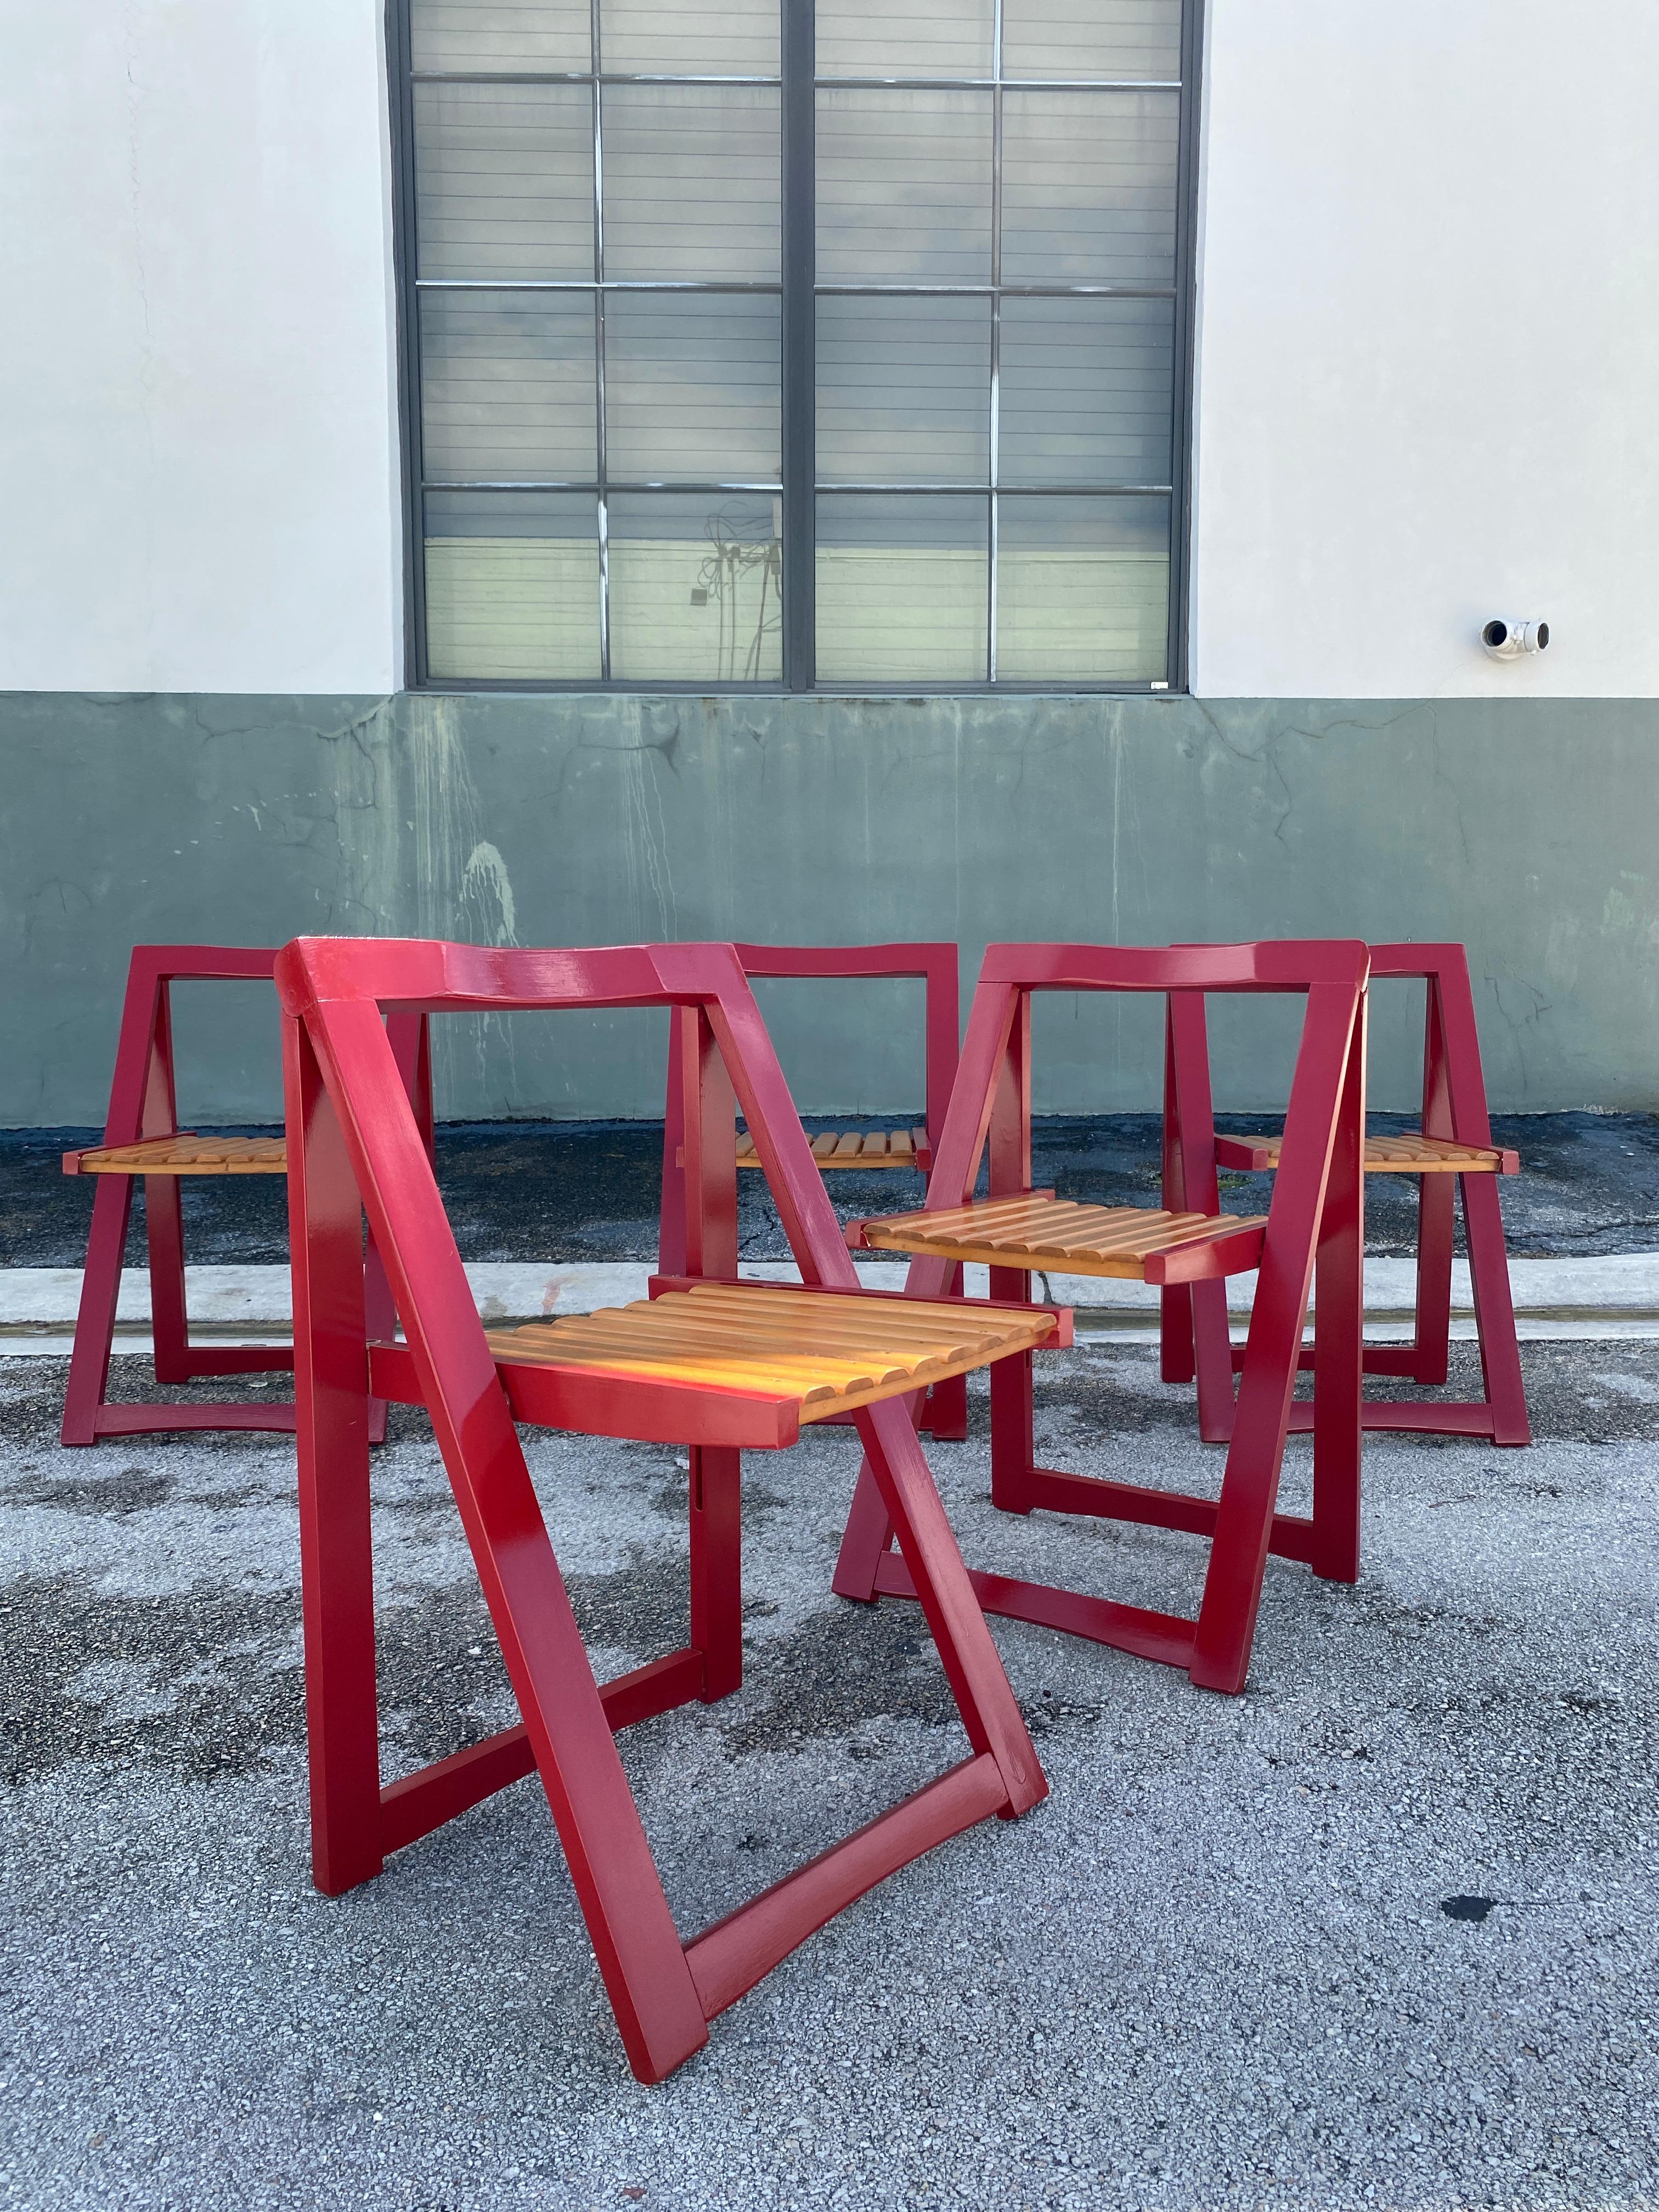 Vintage wooden red folding chairs, 1960s.
Fold completely flat for the ultimate in space-saving options.
They are in very good vintage condition, the mechanisms work as they should and the joints are solid and sturdy.

Measures: 18